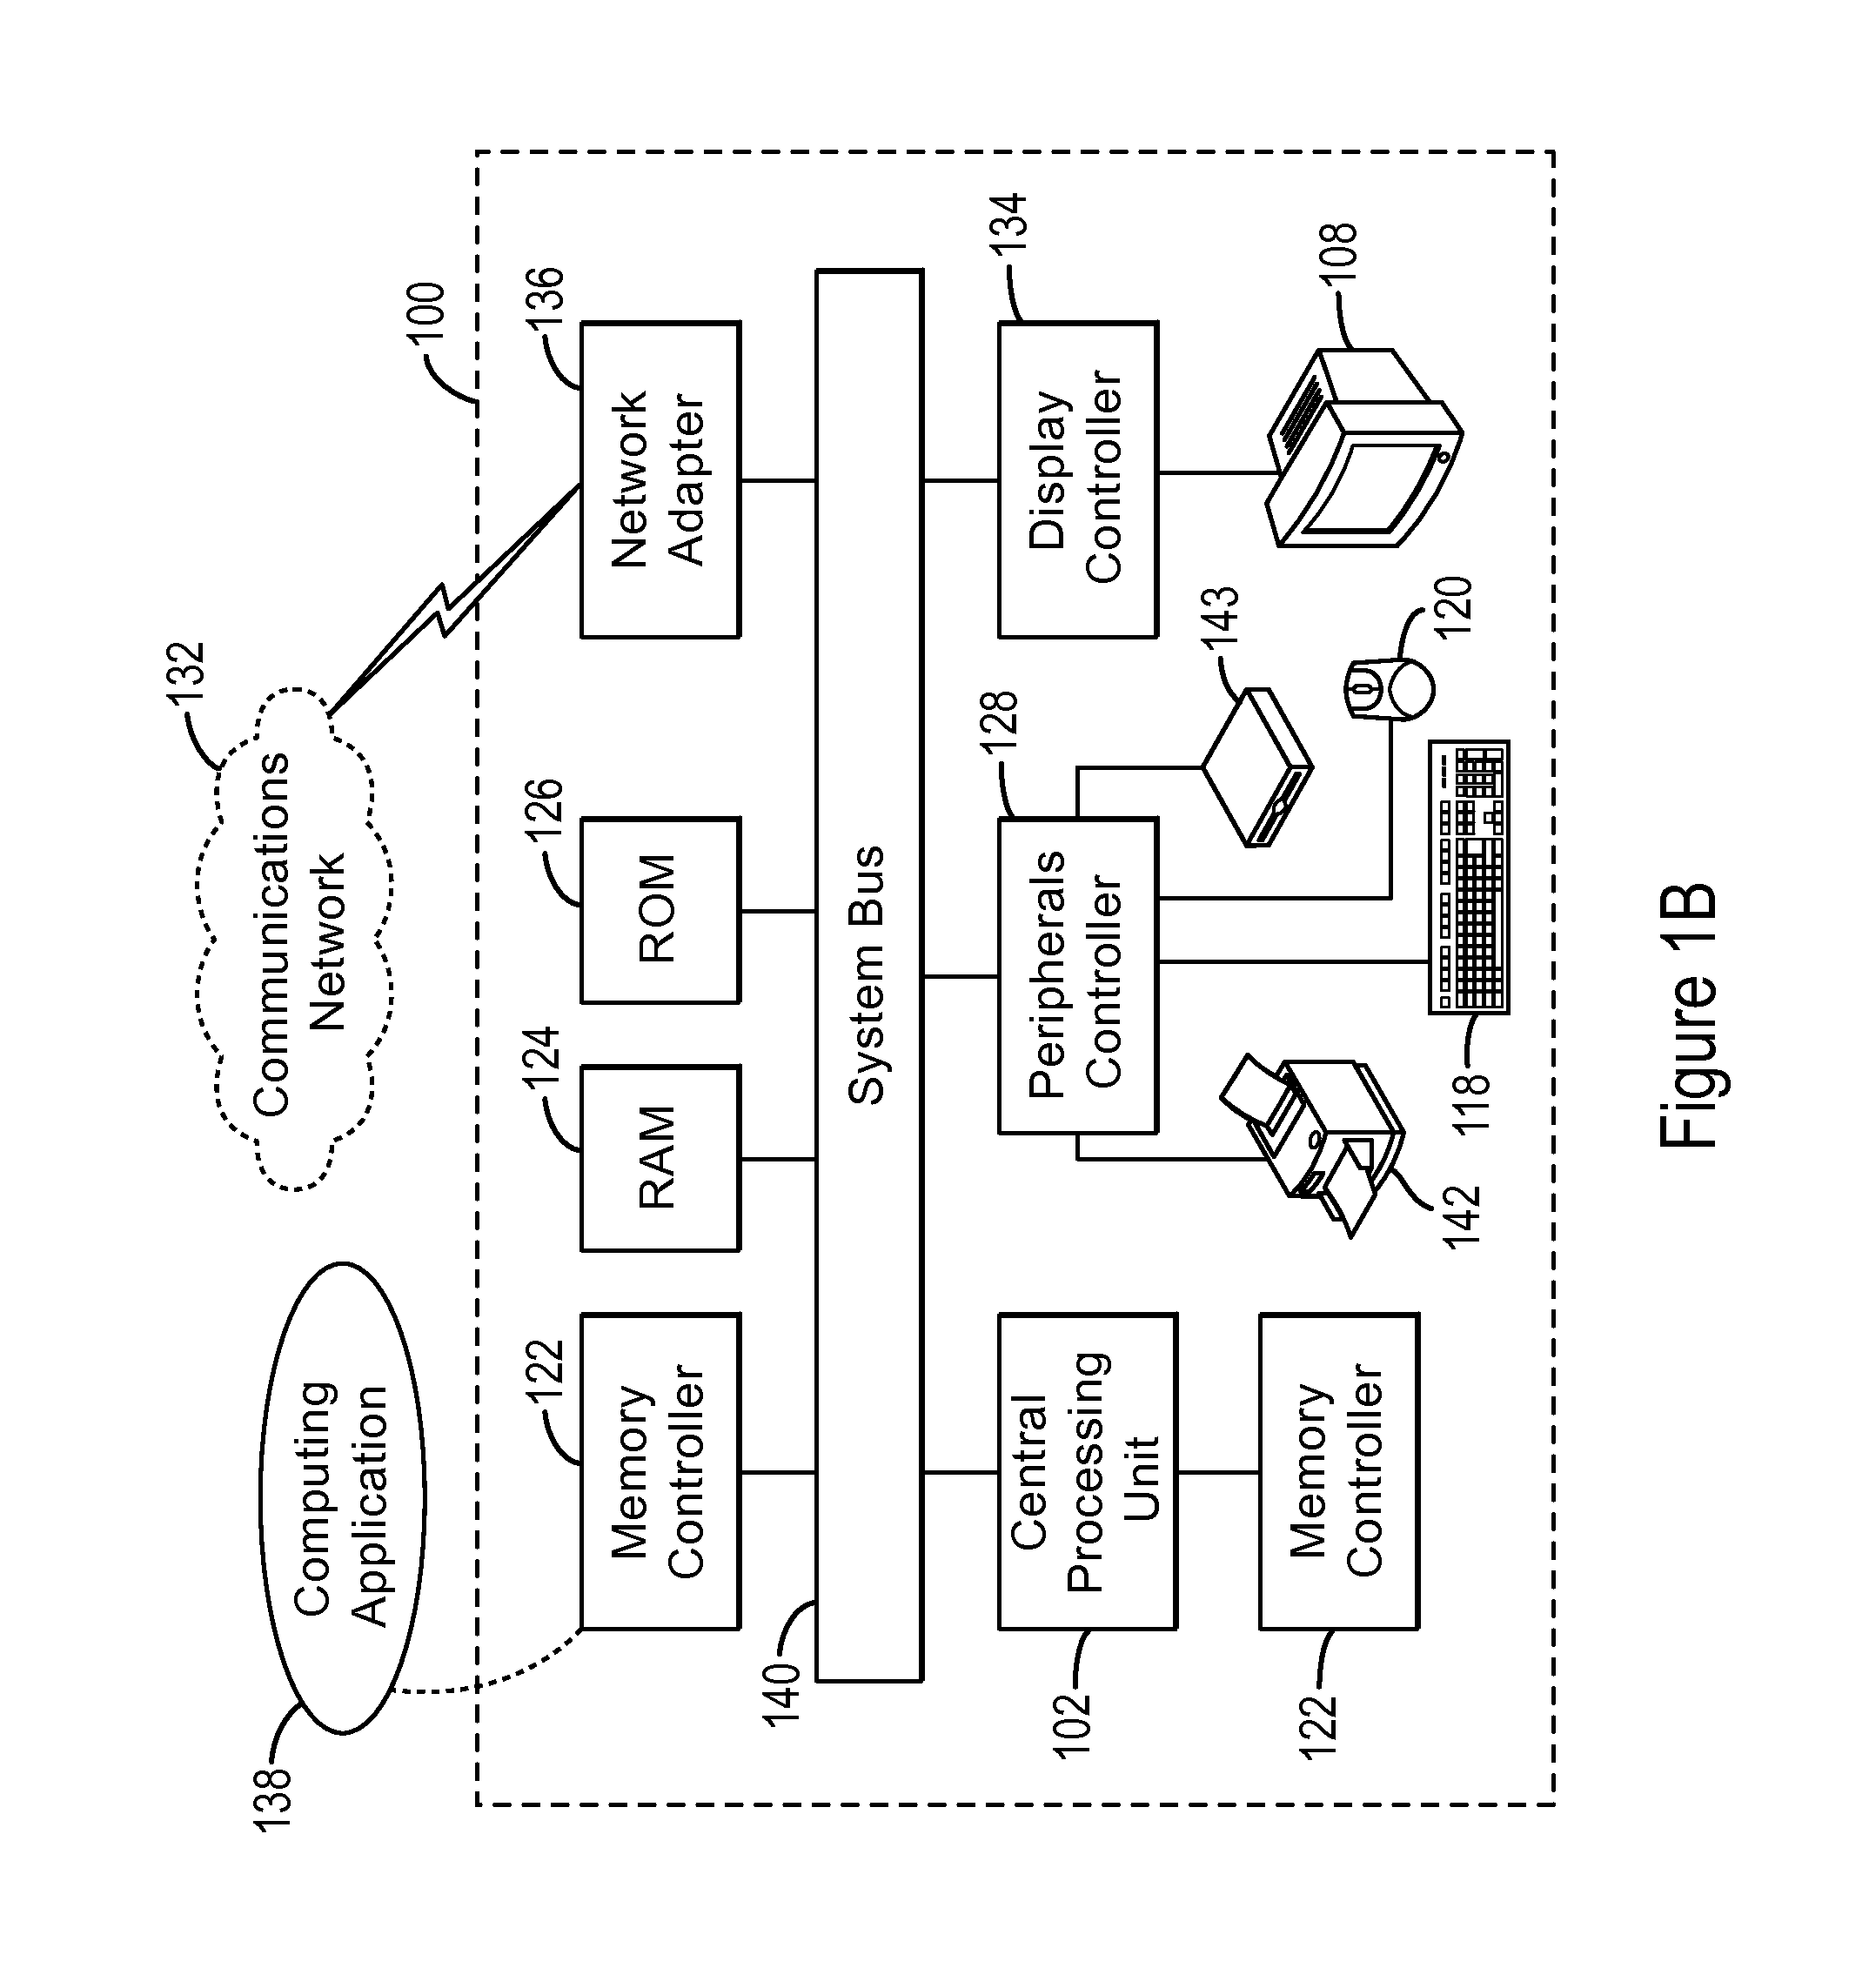 Systems and methods for assessment of fluid intelligence